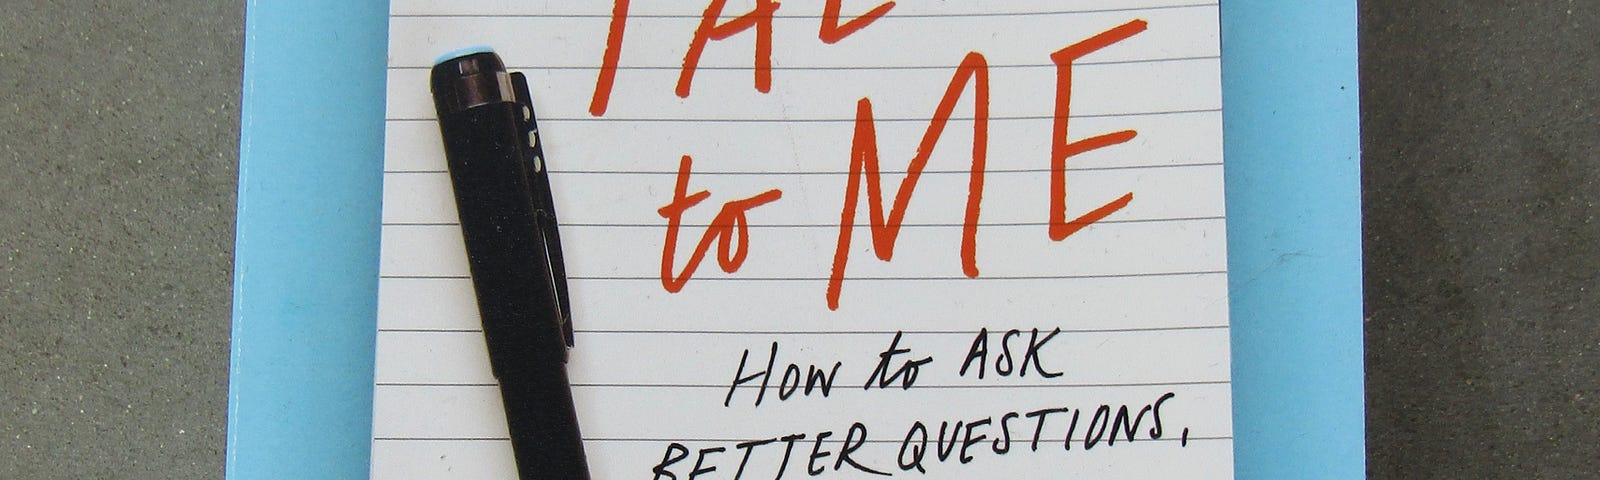 Talk to Me, by Dean Nelson, PhD